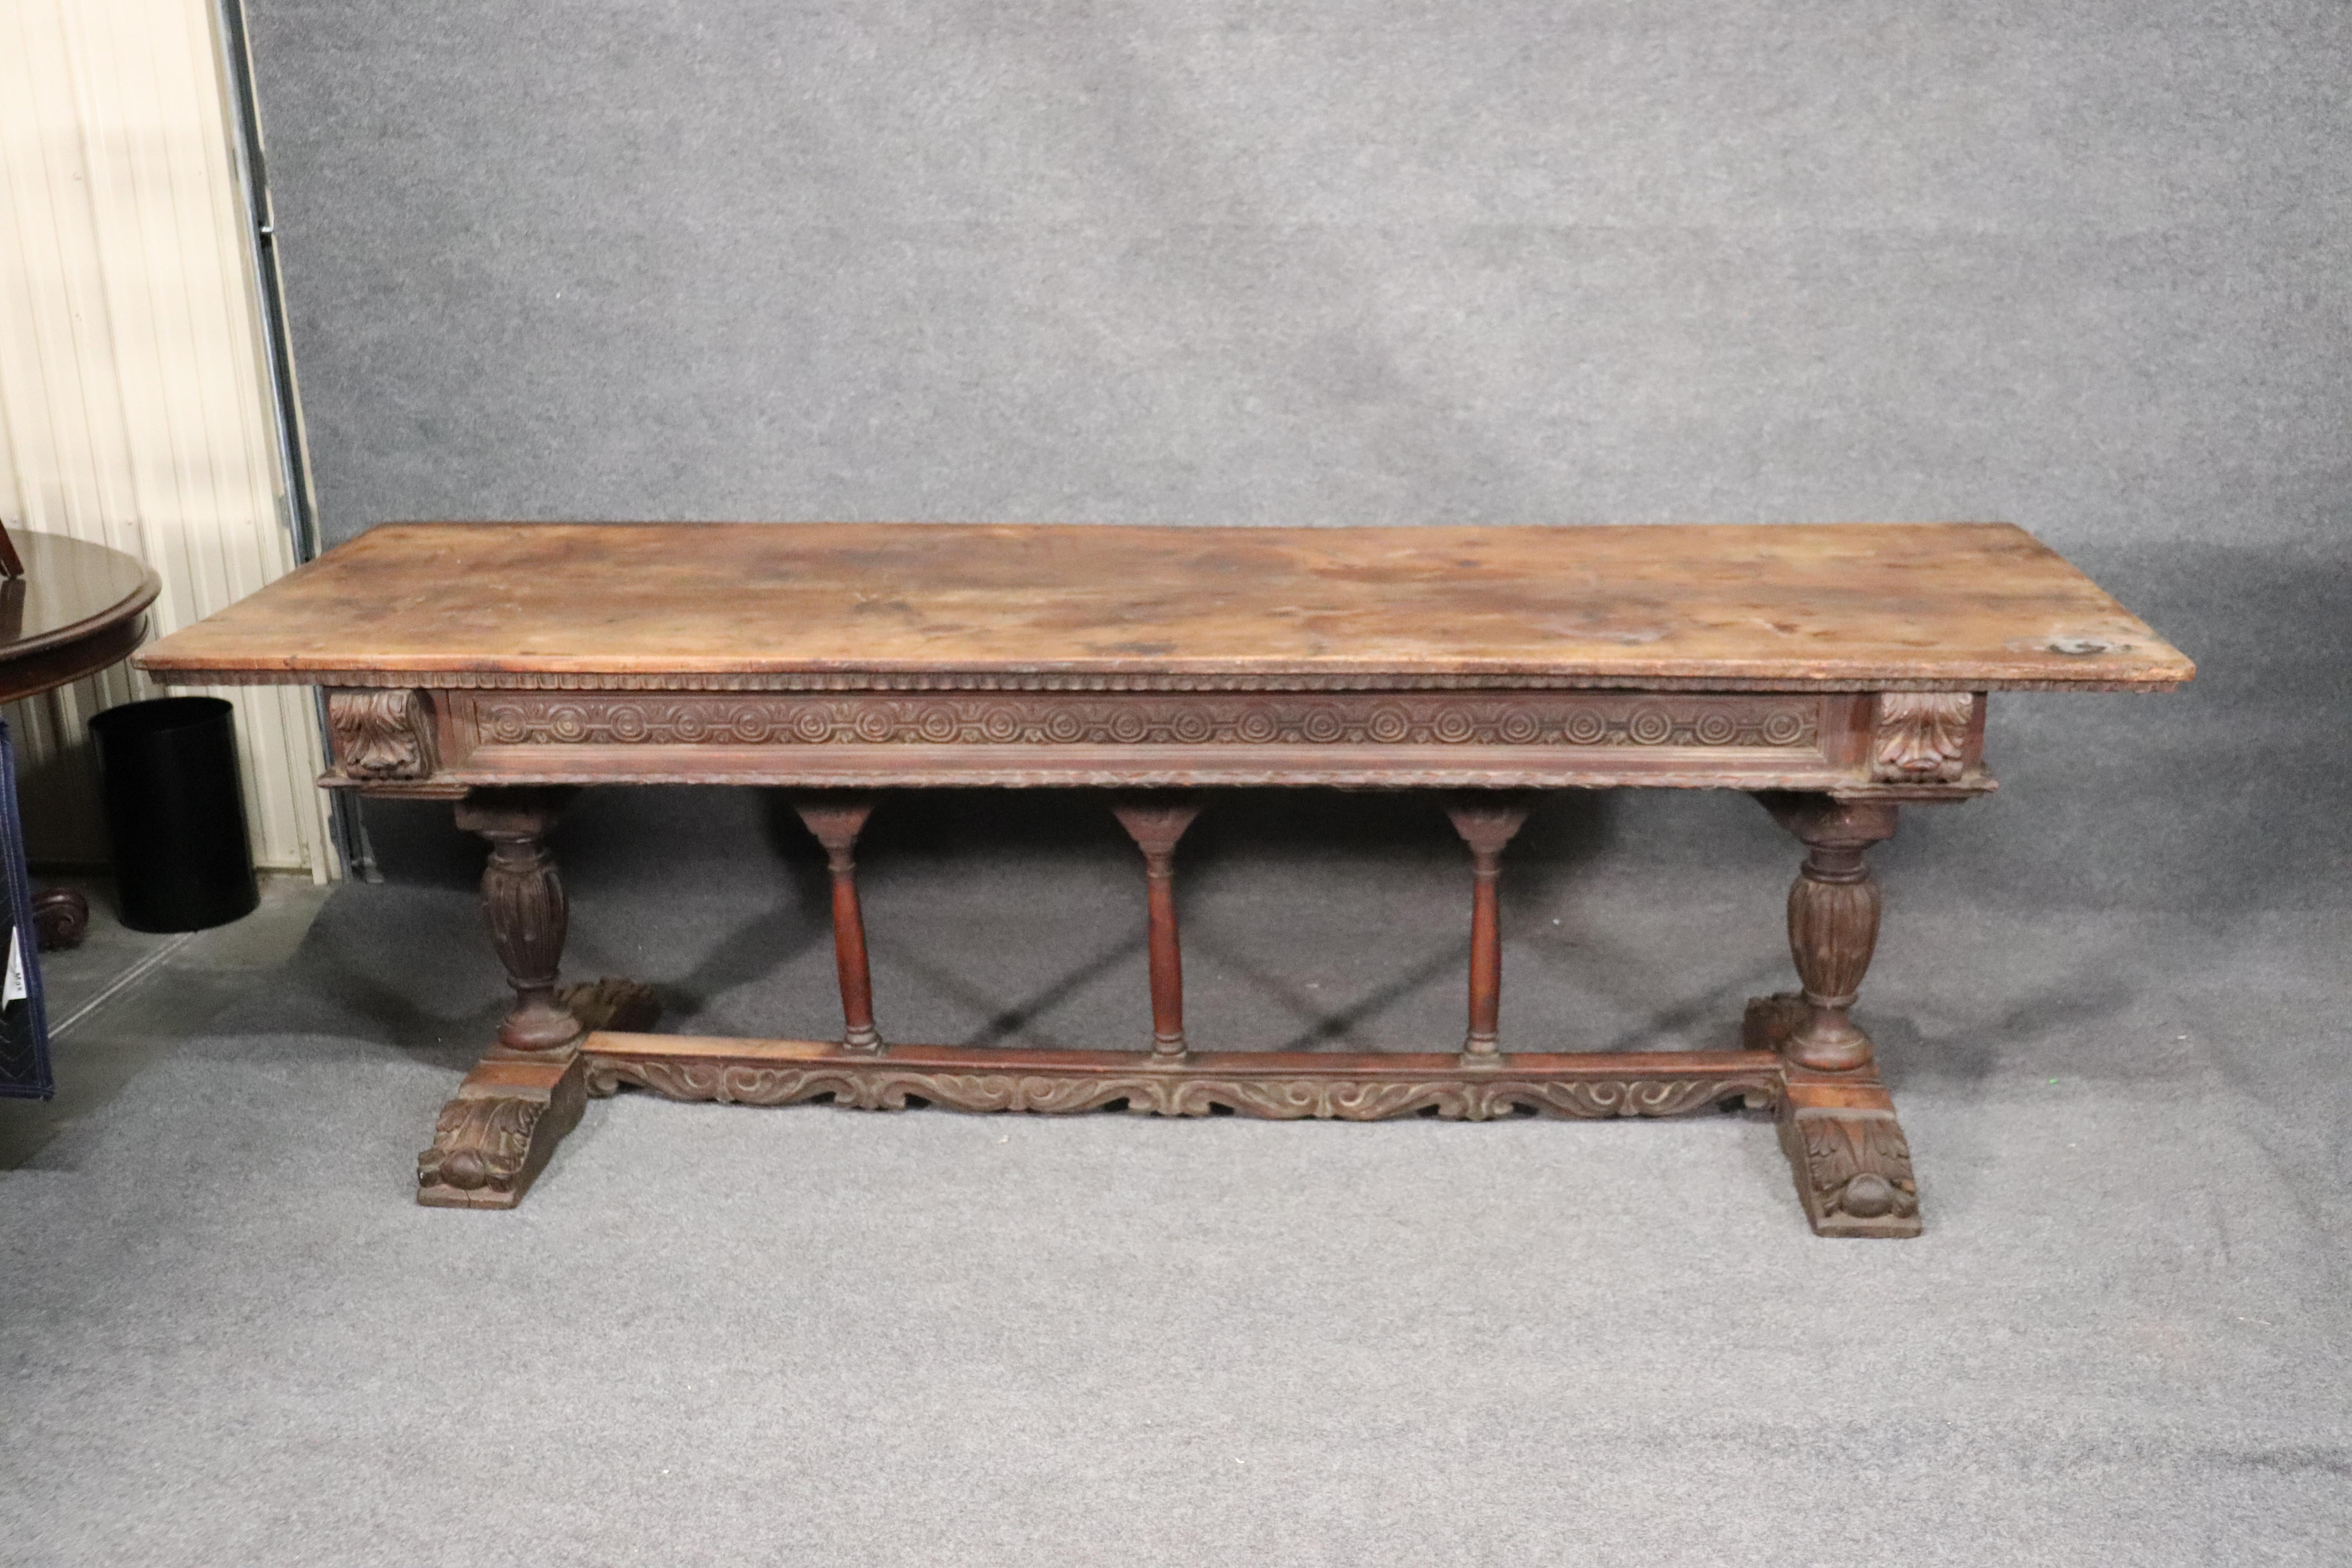 This is a rare solid walnut Italian Baroque dining or library dining table. The table has a removable top and drawers which is not common for a table of this length. The table is in as-found condition and has the usual tell-tale signs of age and